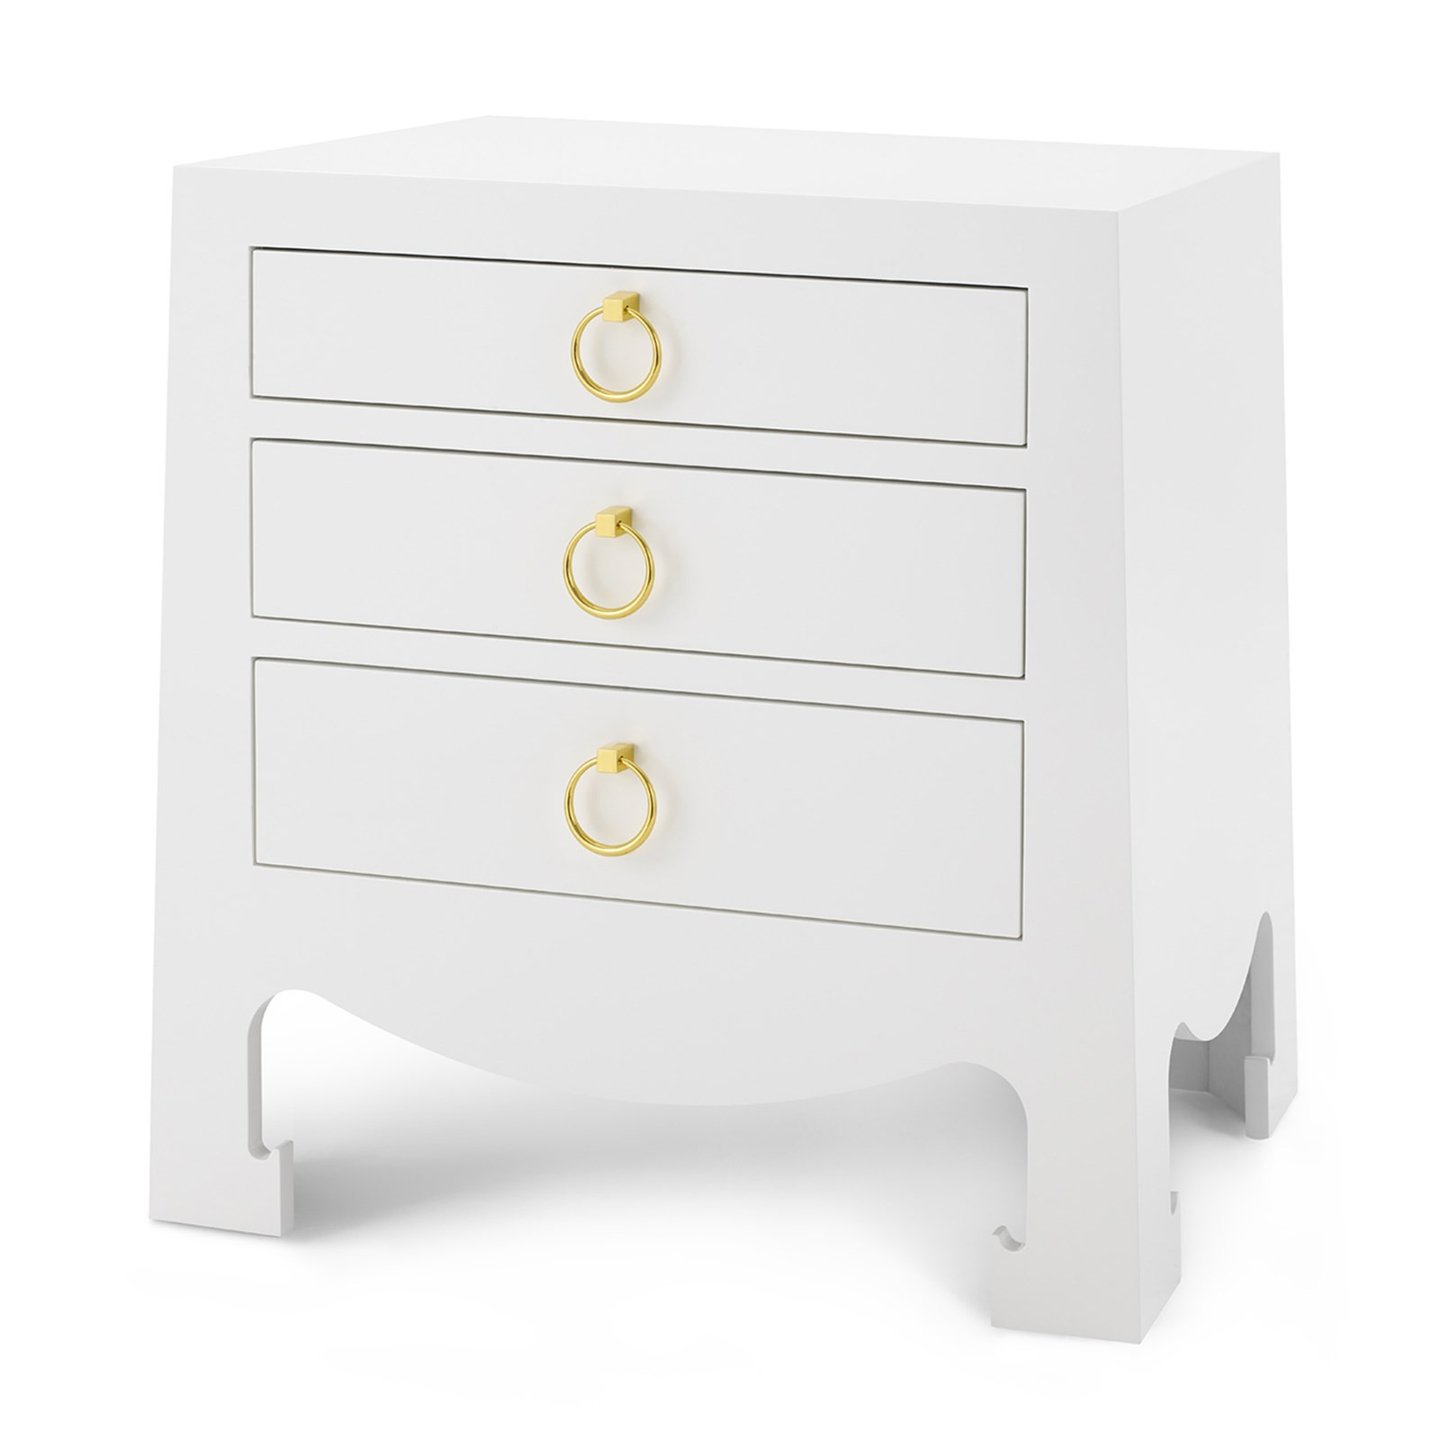 white nightstand with drawers attractive bungalow jacqui drawer side table regard prepac accent amazing nightstands outdoor couch set home goods dining chairs elm lucite furniture